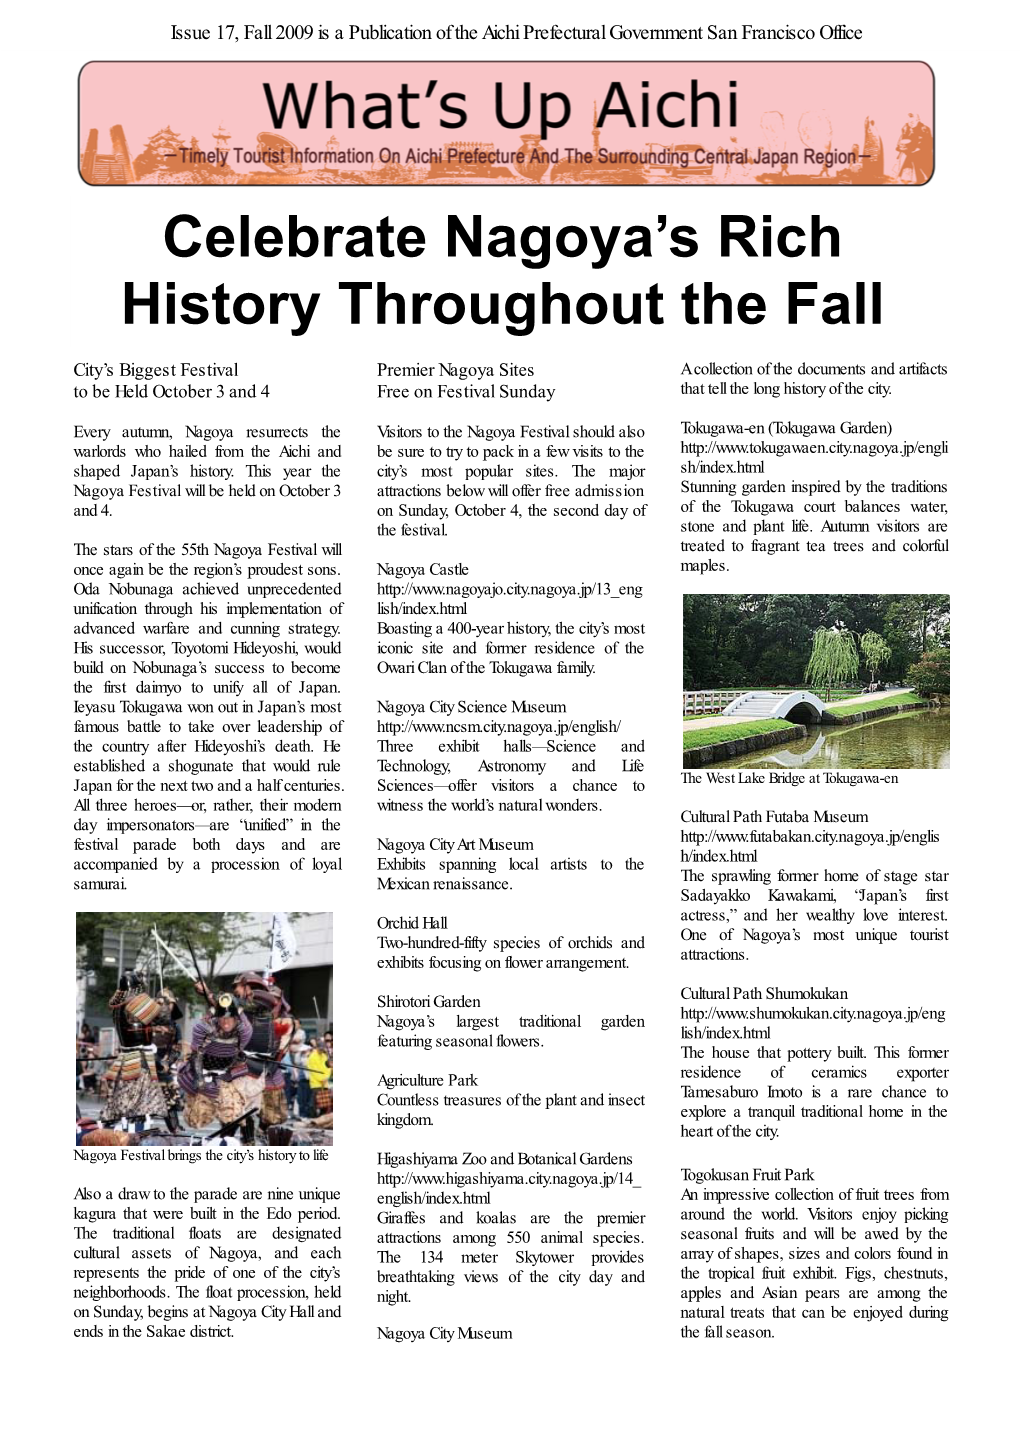 Celebrate Nagoya's Rich History Throughout the Fall